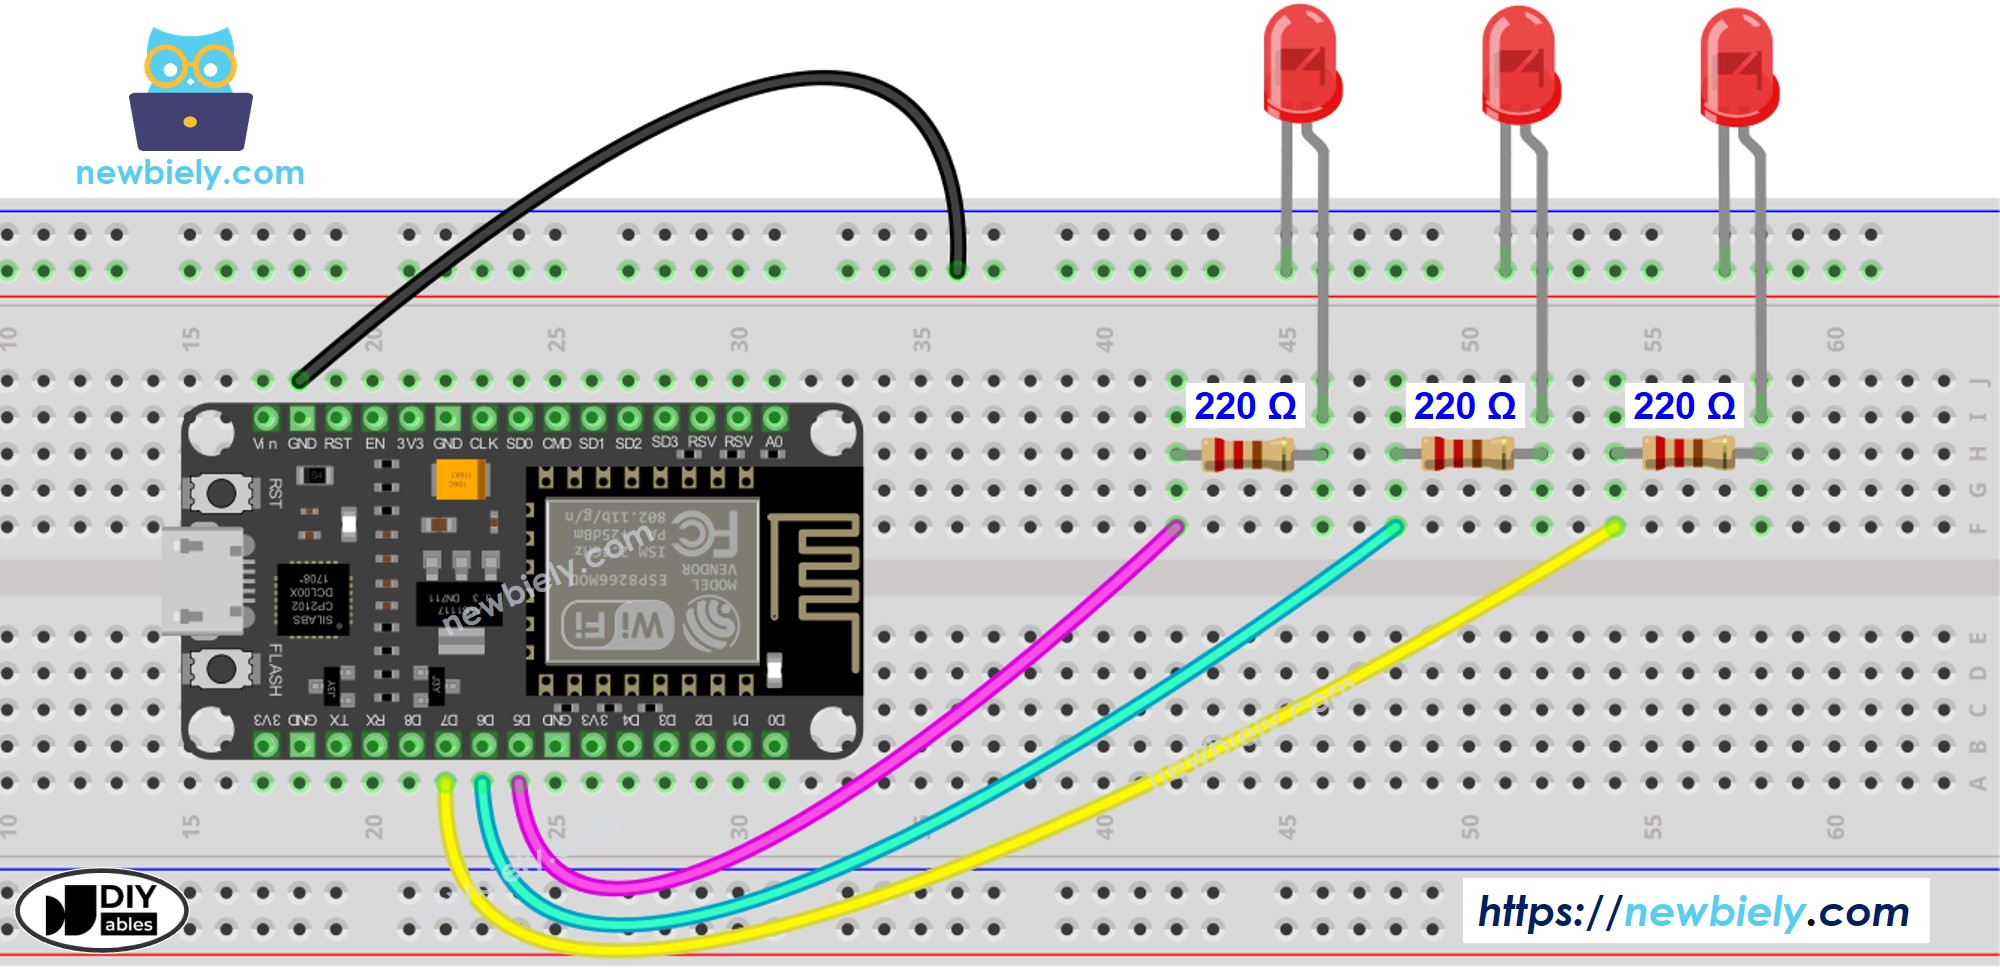 The wiring diagram between ESP8266 NodeMCU and multiple LED